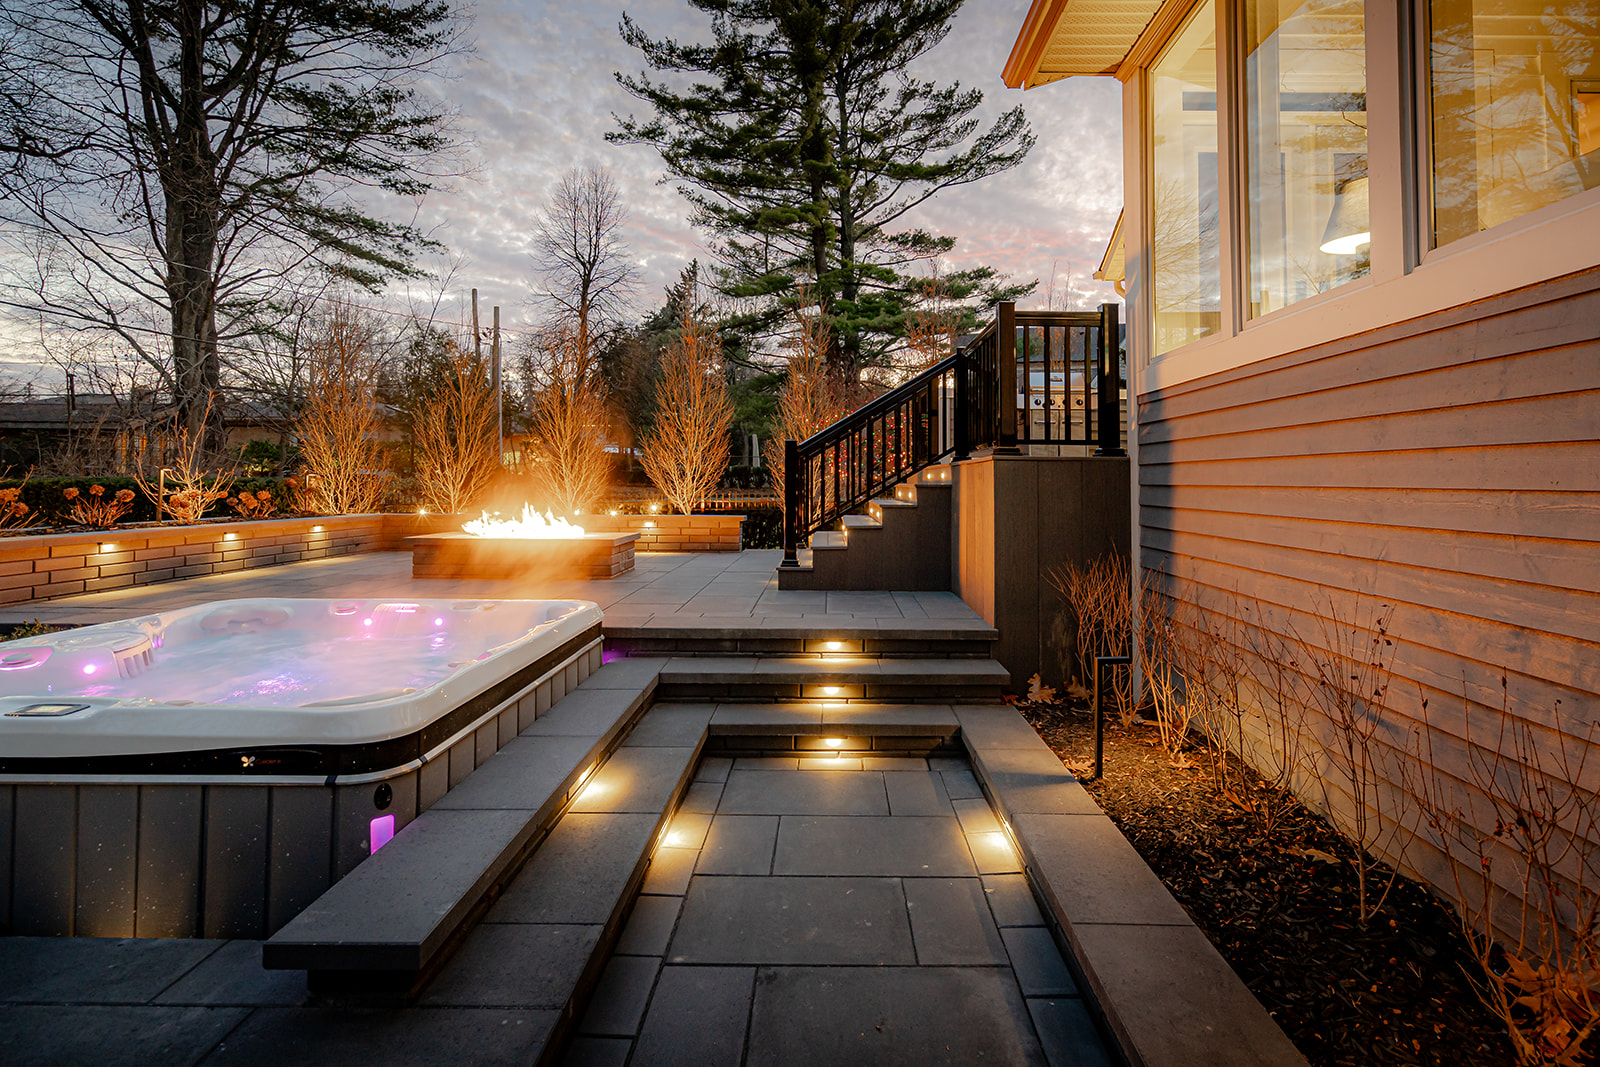 A jacuzzi with lights on and a fireplace with stairs leading to the house.